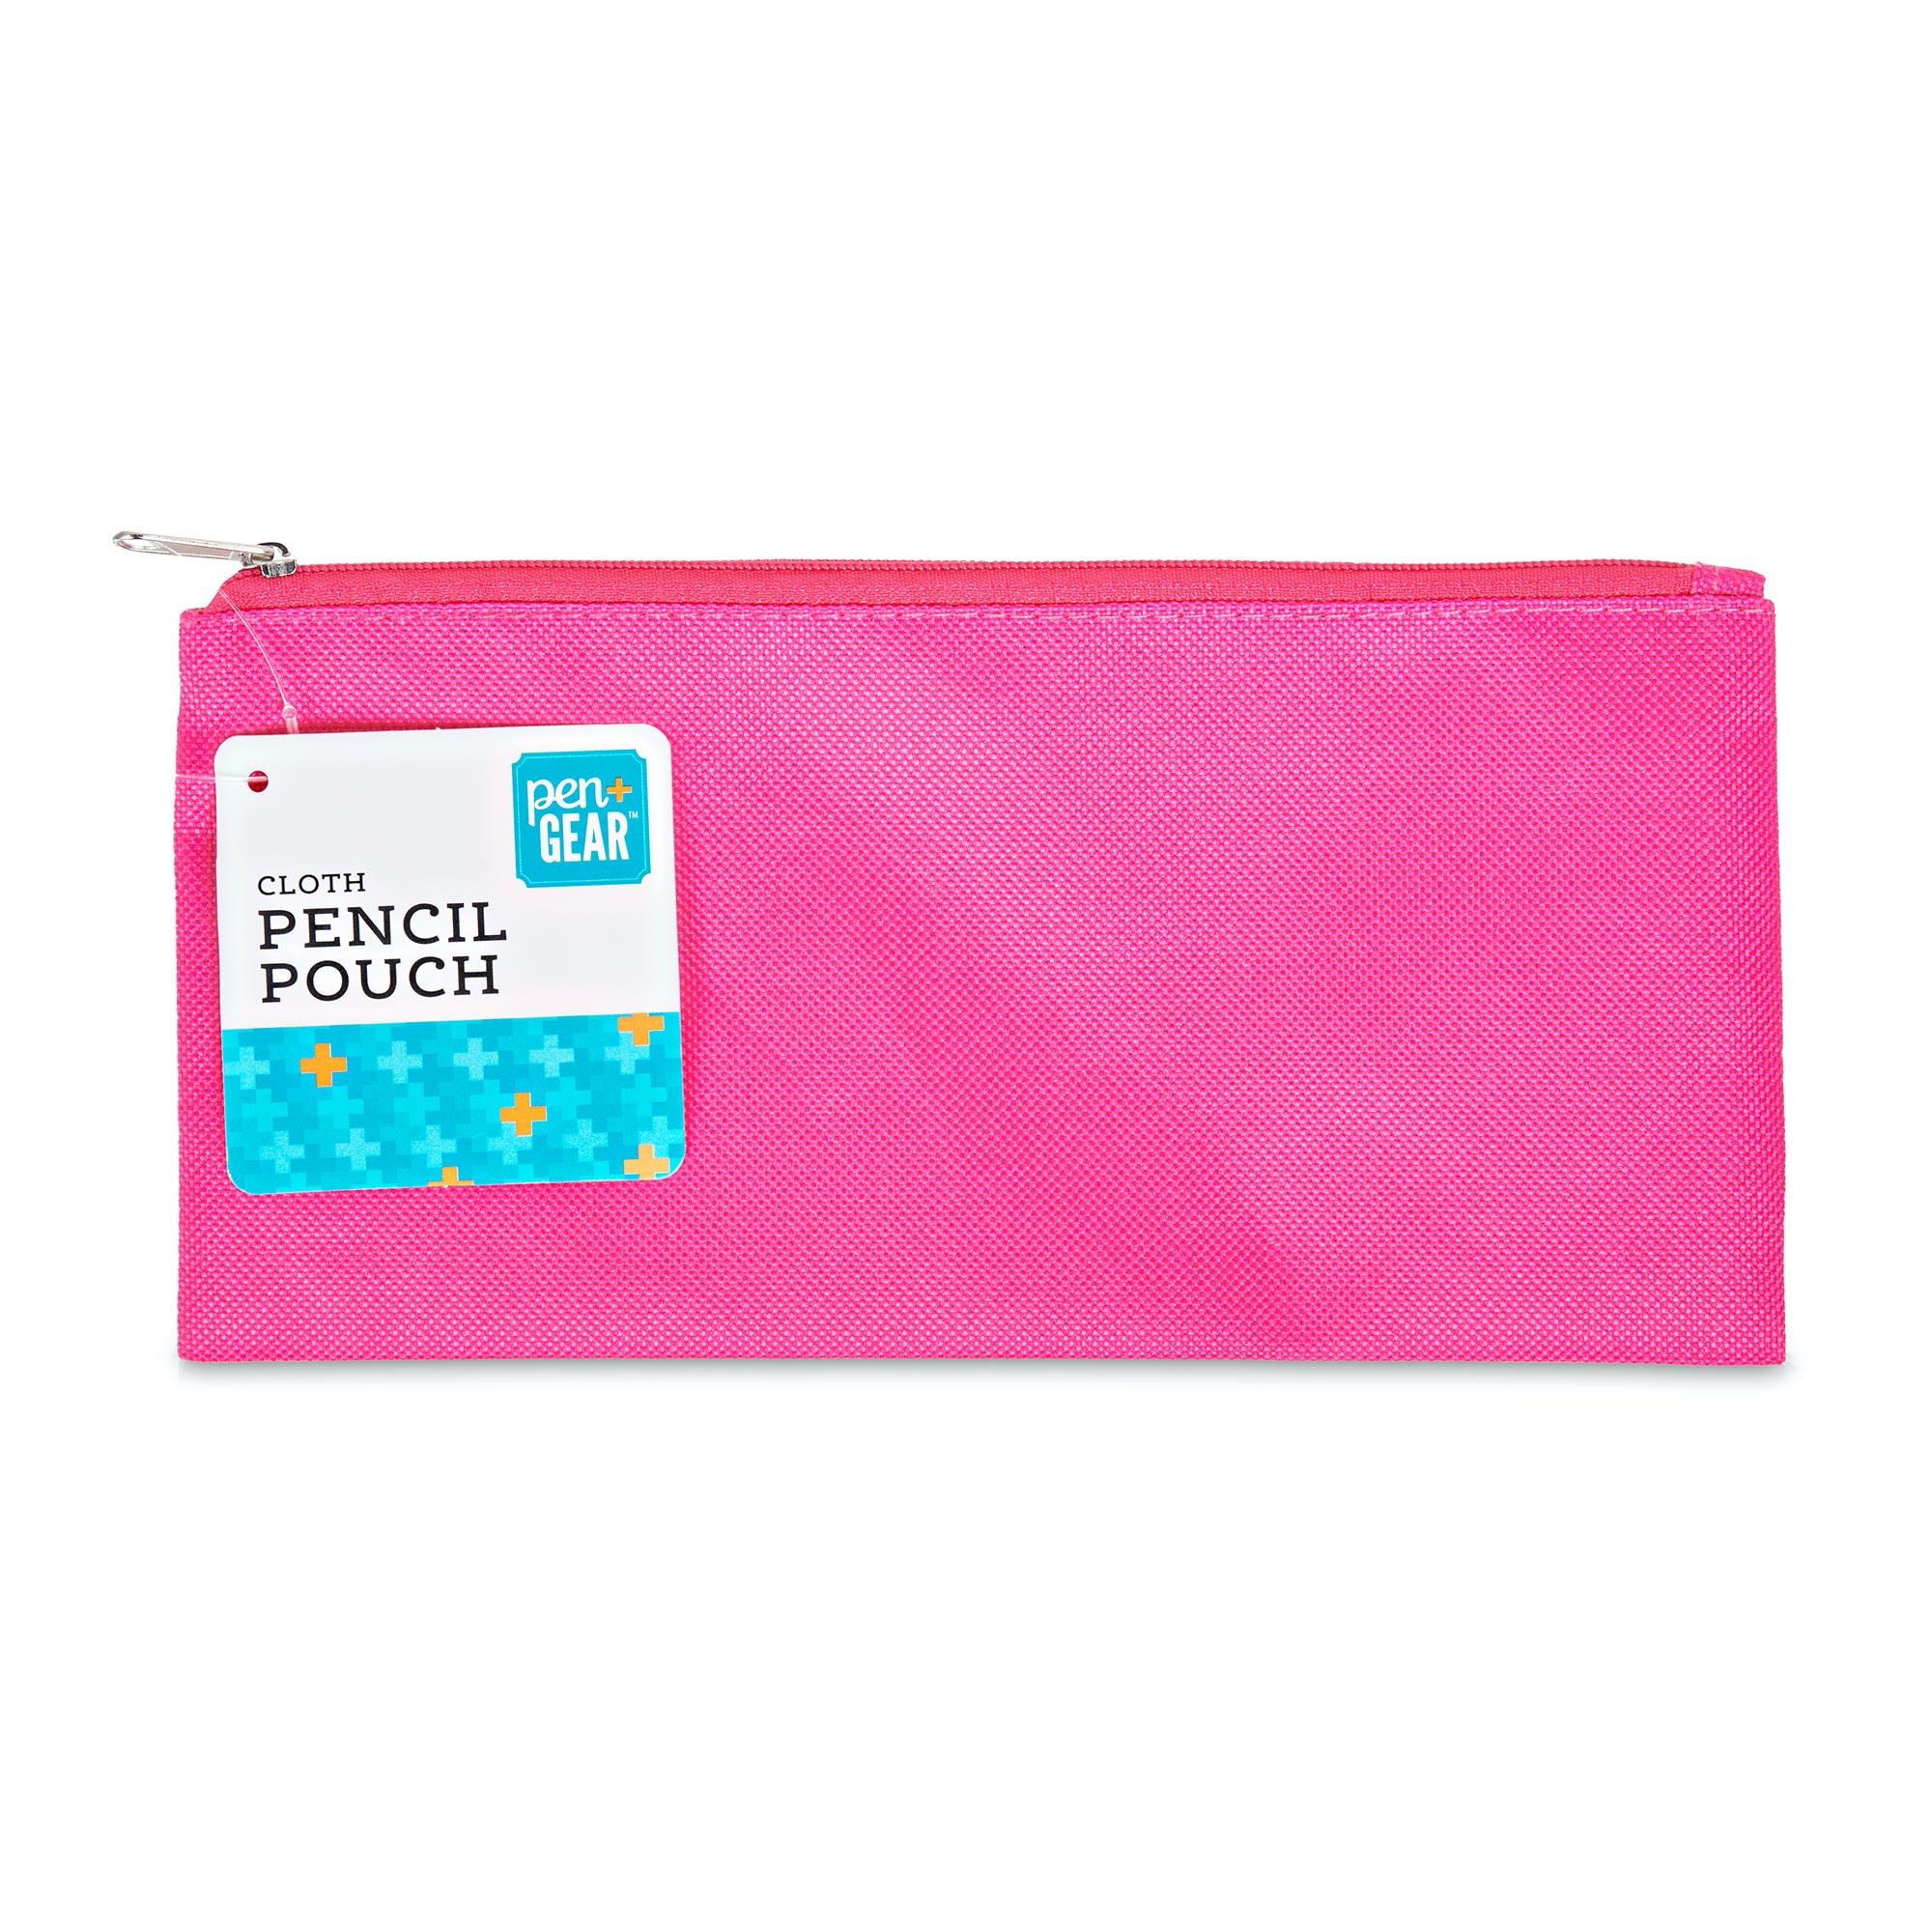 Xmmswdla 8-in-1 Small Pencil Case Pink Pensmall Pen Box Containing 5 Pencils 1 Eraser and 1 Ruler Suitable for Children As School Gifts or Birthday